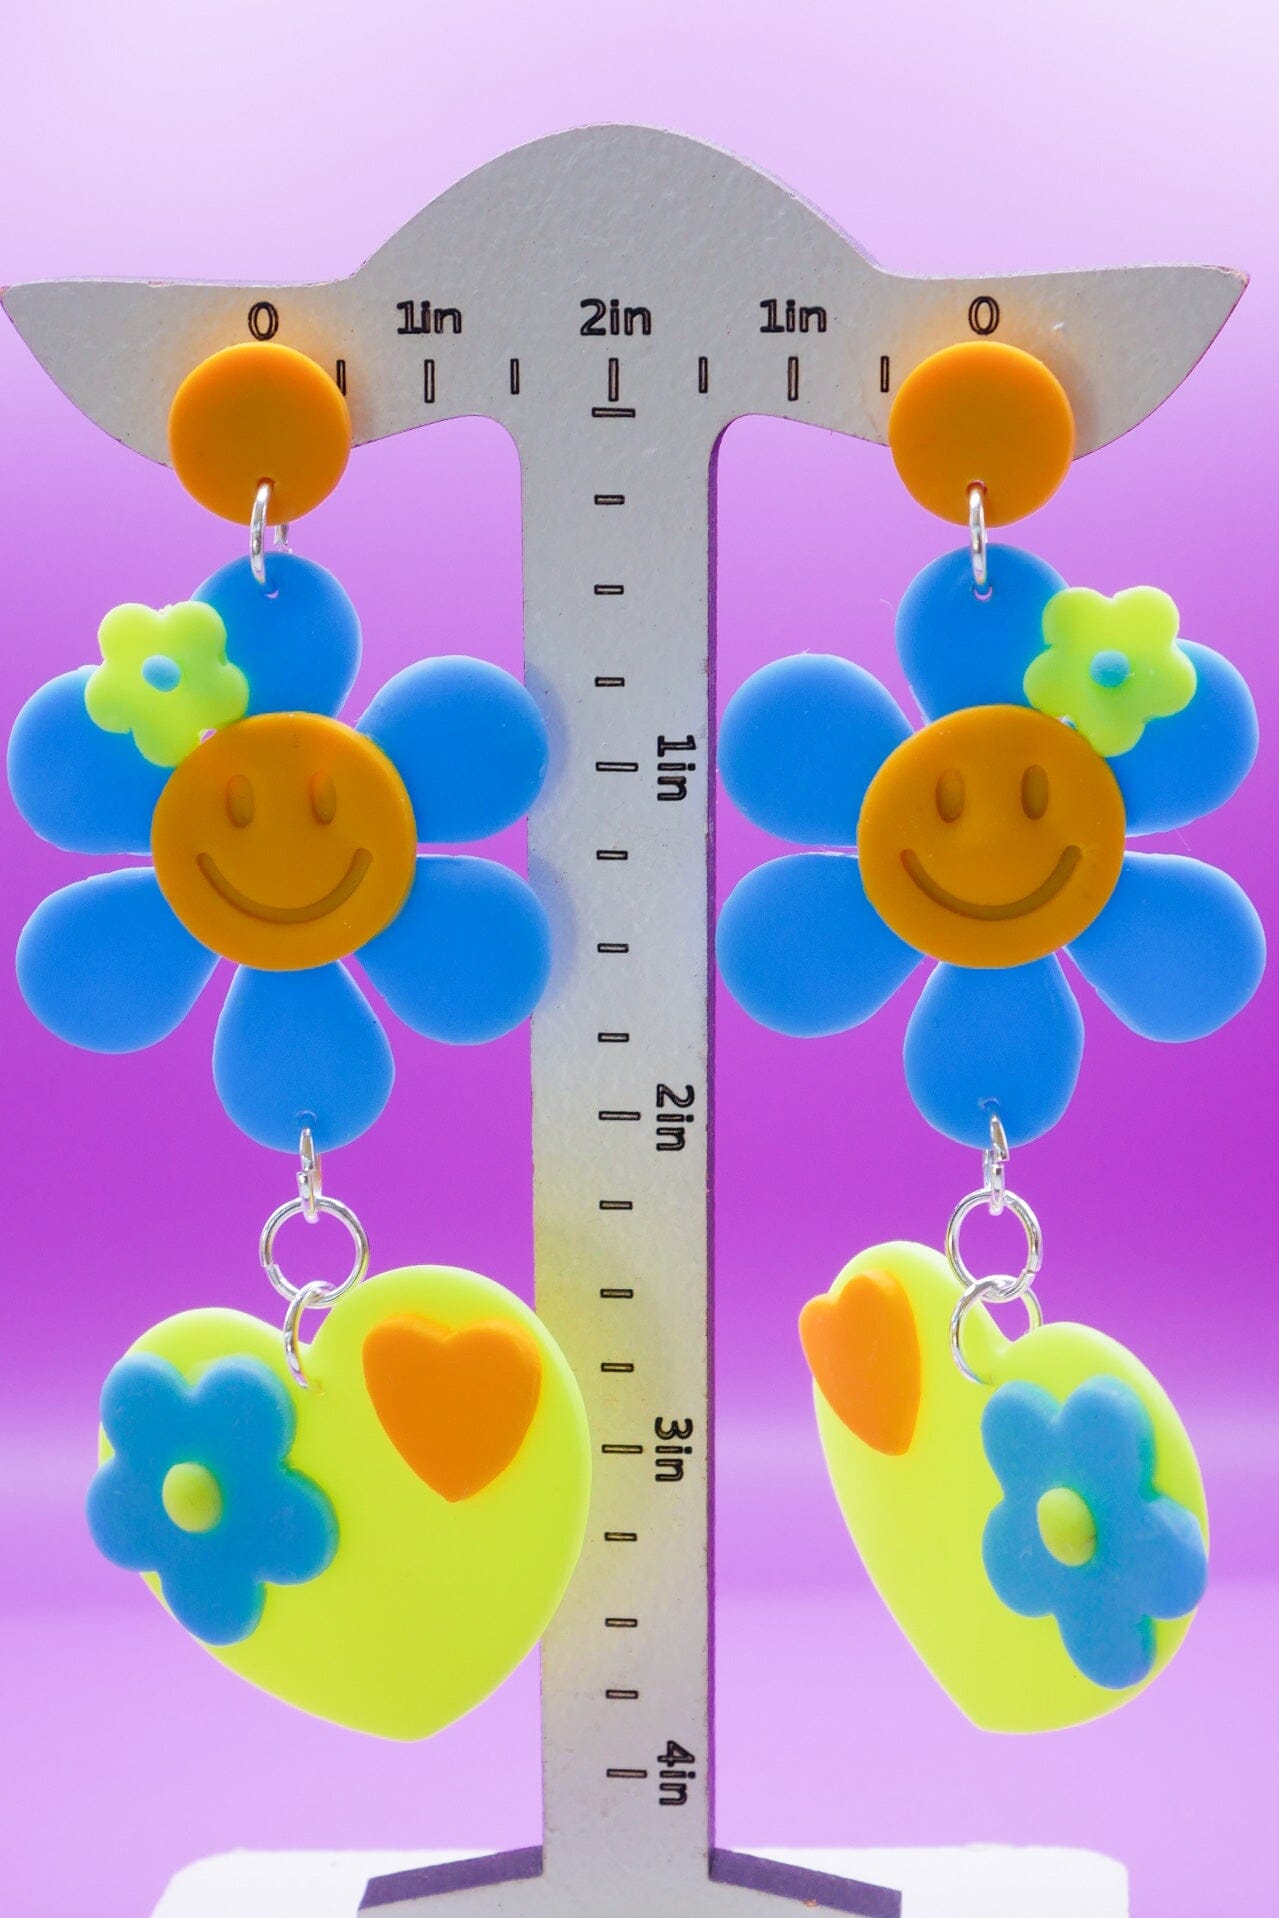 Smiley Hearts in Bloom Neon Yellow + Baby Blue Earrings Love Hand and Heart 